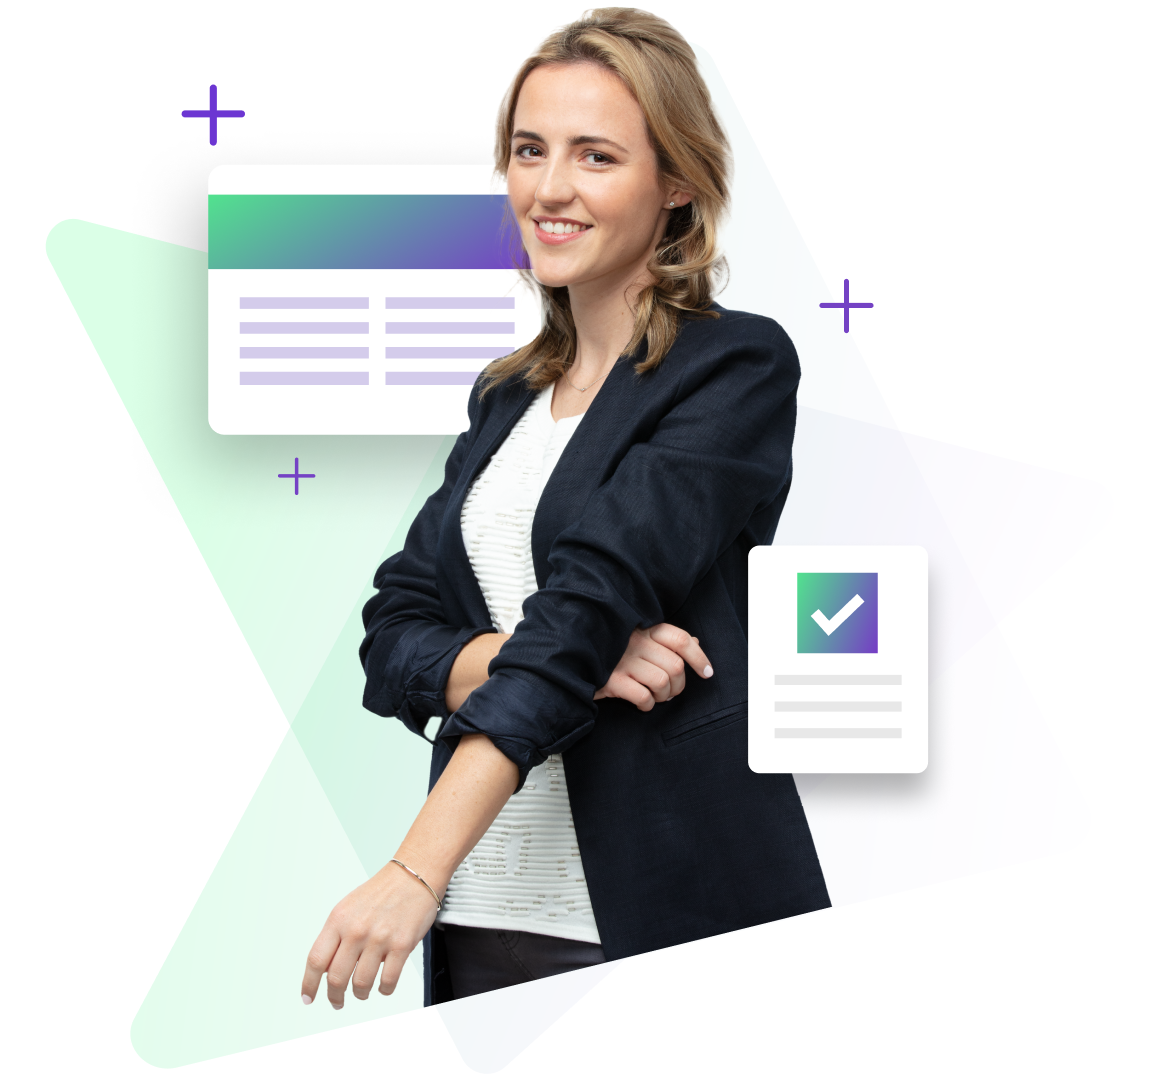 The image features a card and a megaphone illustration. The card is green and white, and the megaphone is purple. The image conveys the idea of communication, interaction, and collaboration, highlighting the importance of effective communication in various professional contexts.